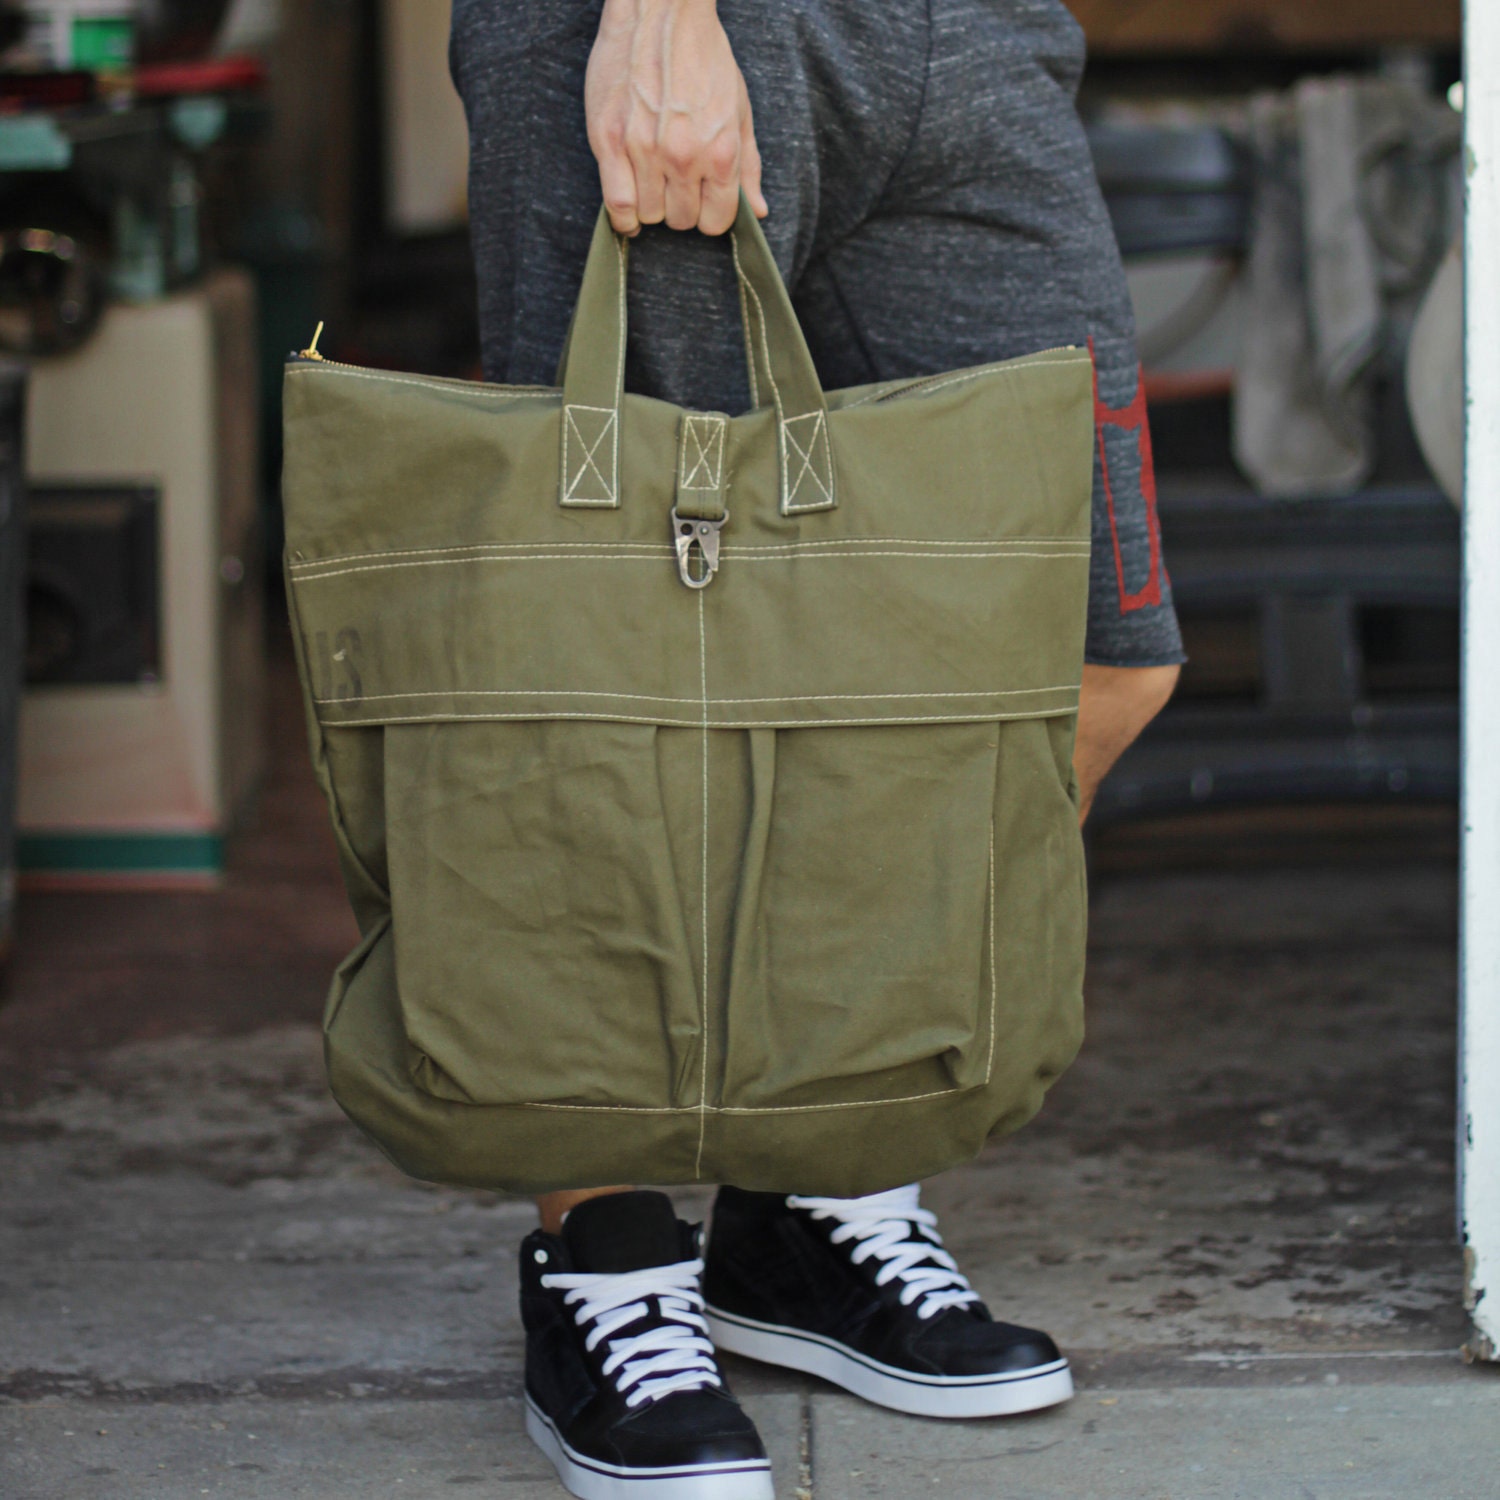 Mens Bag: Army Helmet Bag by Unions of Smith